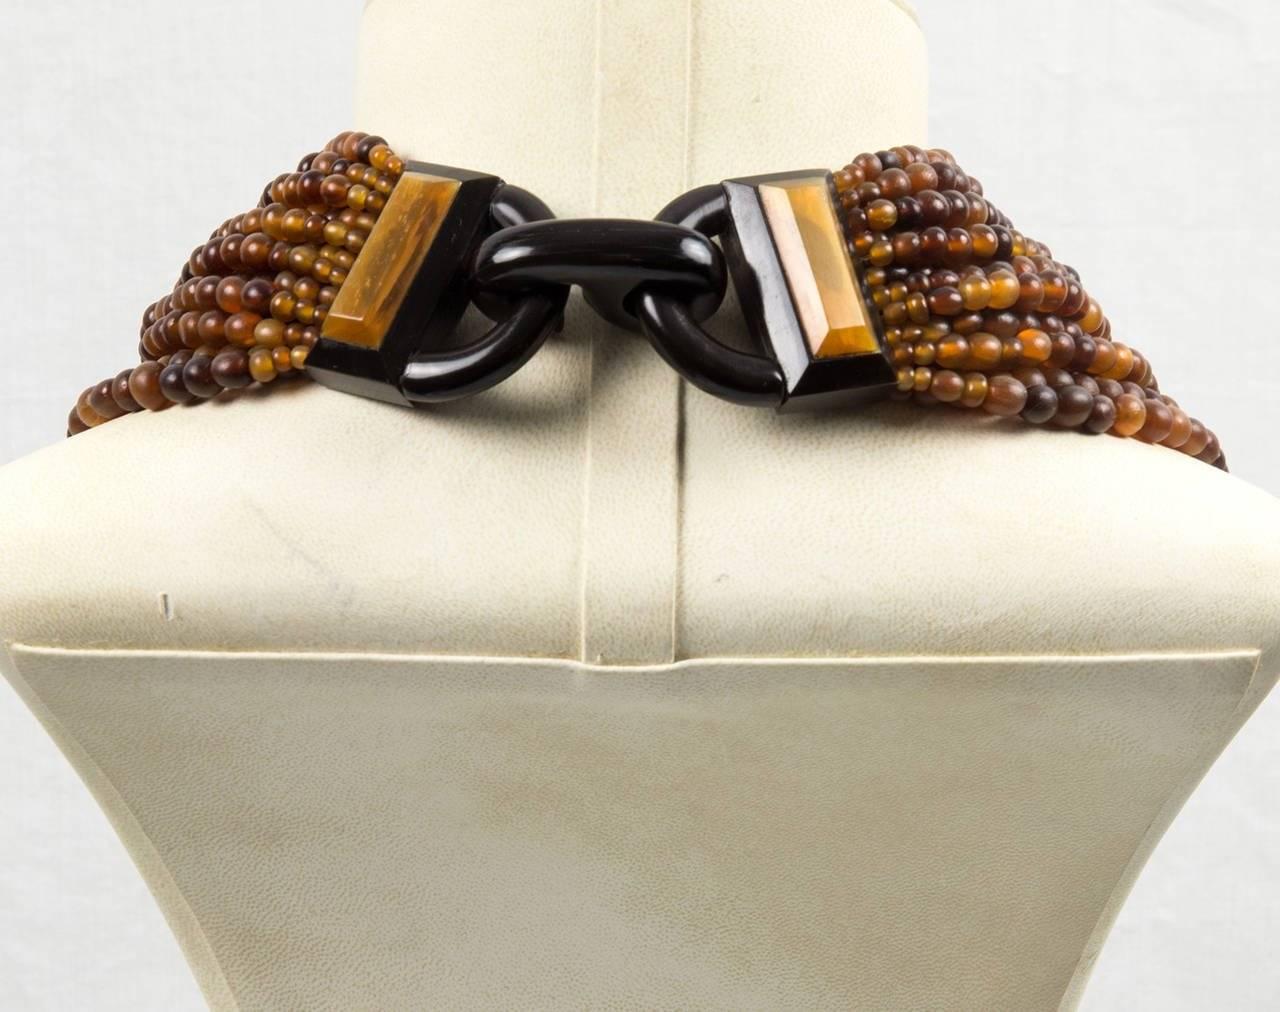 Dramatic designer necklace by husband and wife team Gerda Lynggaard & Nikolai Monies of Copenhagen Denmark, known for large scale high end costume jewelry incorporating natural materials; Rows and rows of rich Natural Horn Beads are gathered with an